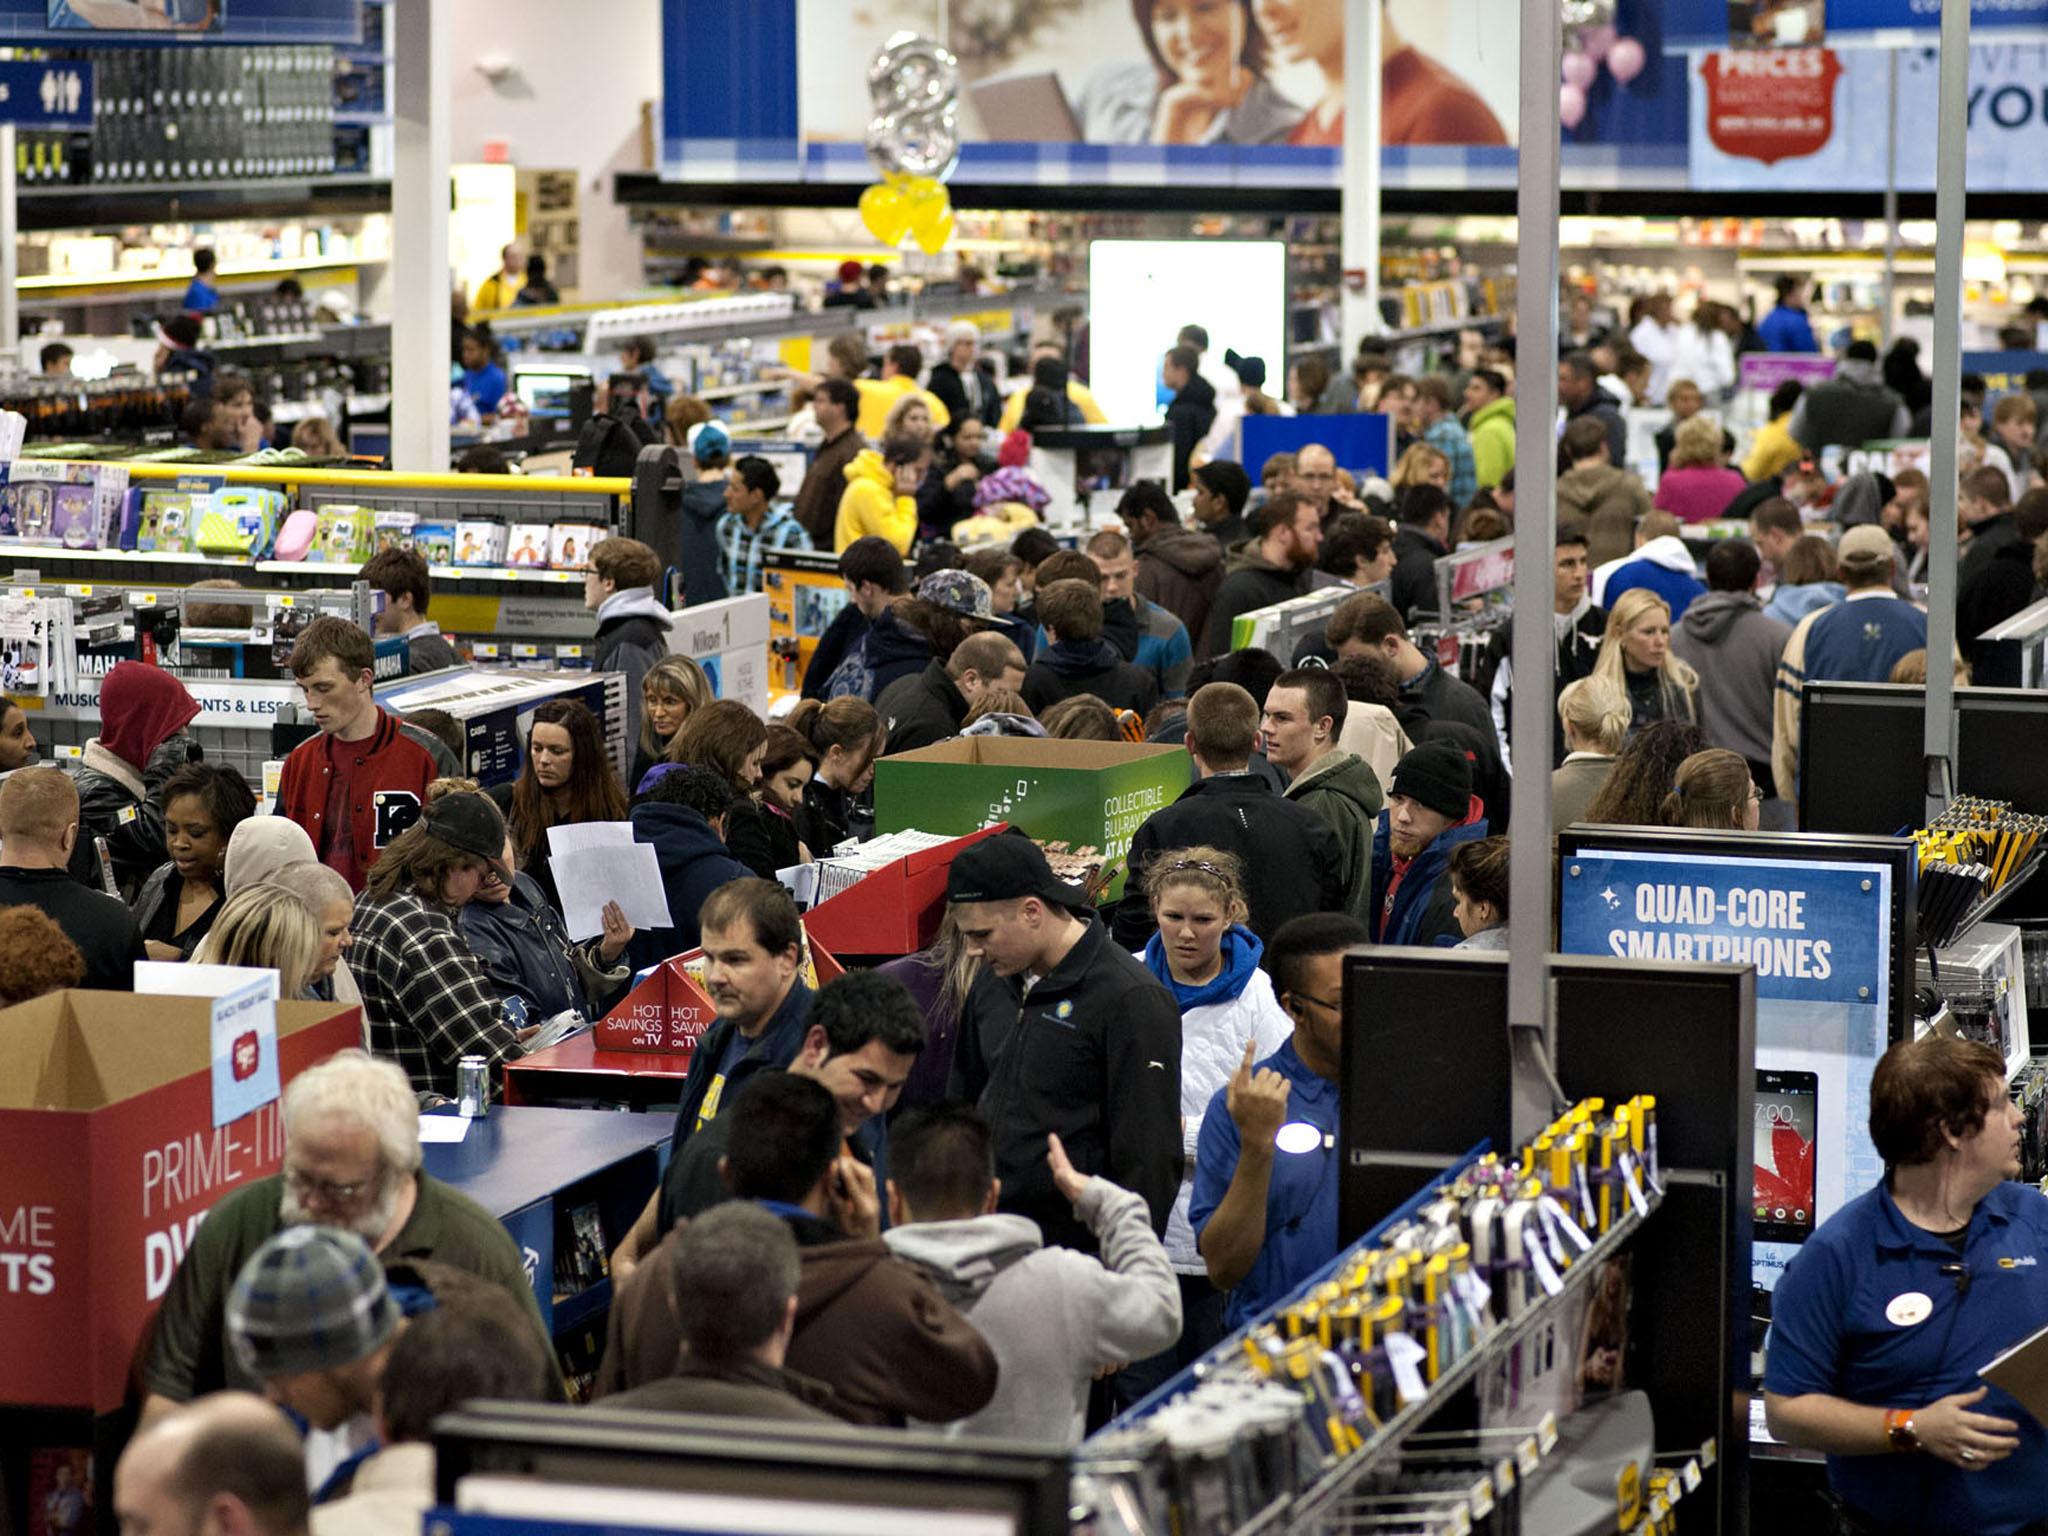 Stores are usually mobbed this week as the festive season begins and the bargains abound